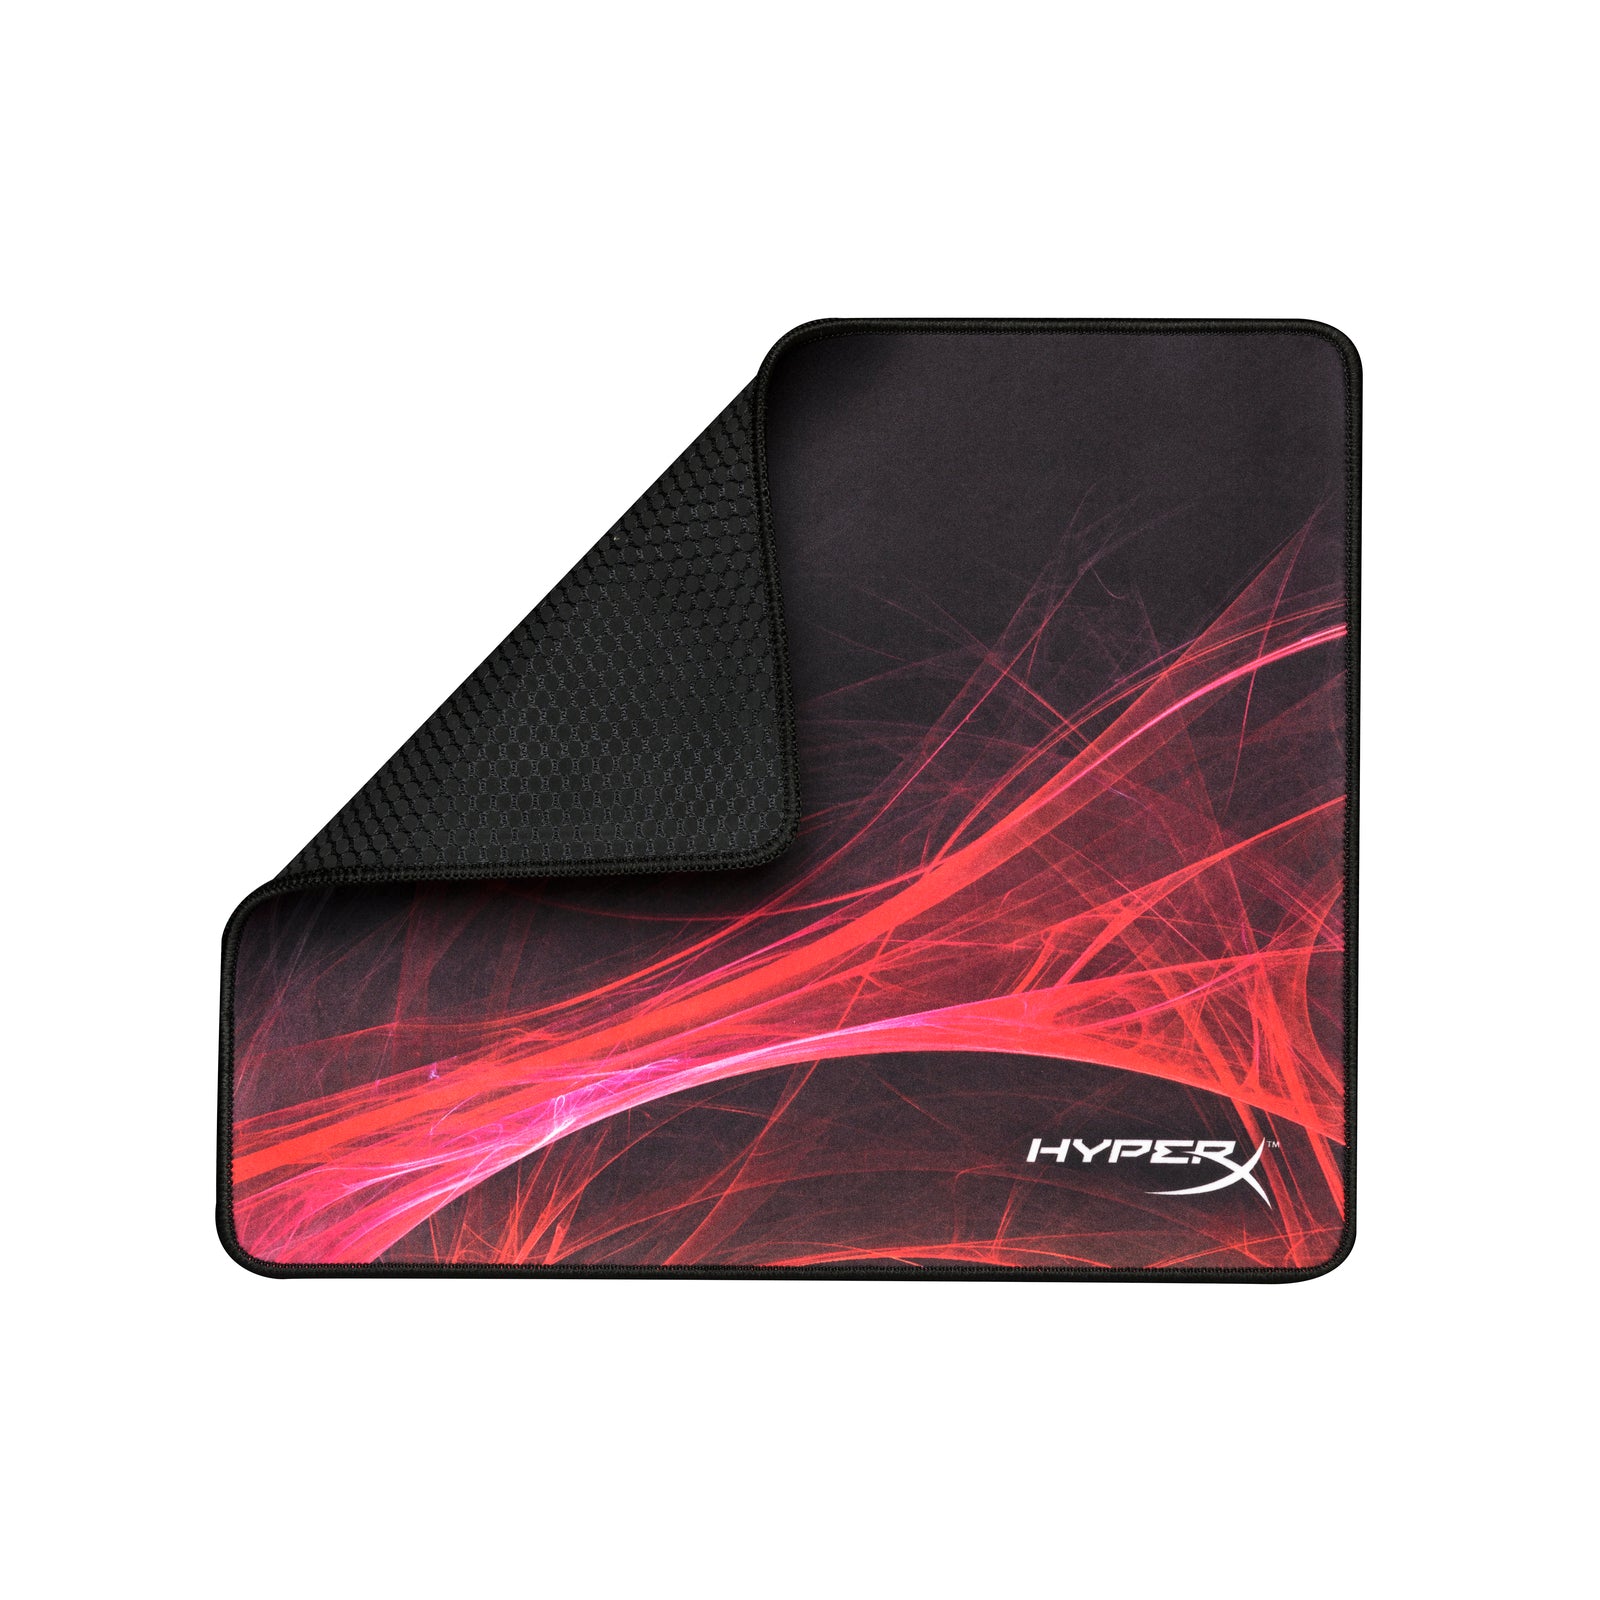 FURY S Gaming Mouse Pad | HyperX – HyperX ROW